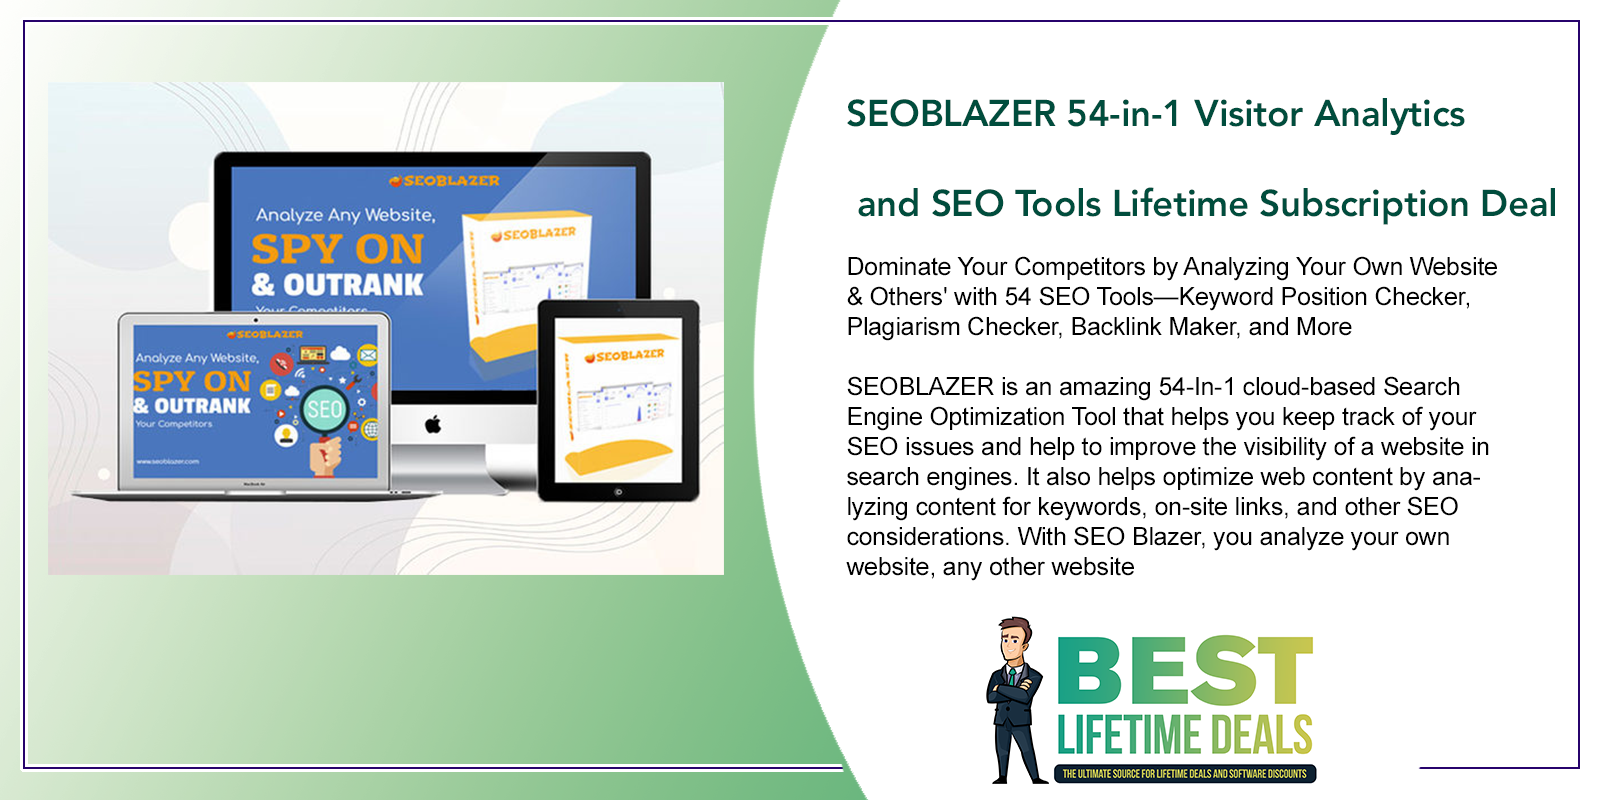 SEOBLAZER 54 in 1 Visitor Analytics and SEO Tools Lifetime Subscription Deal Featured Image